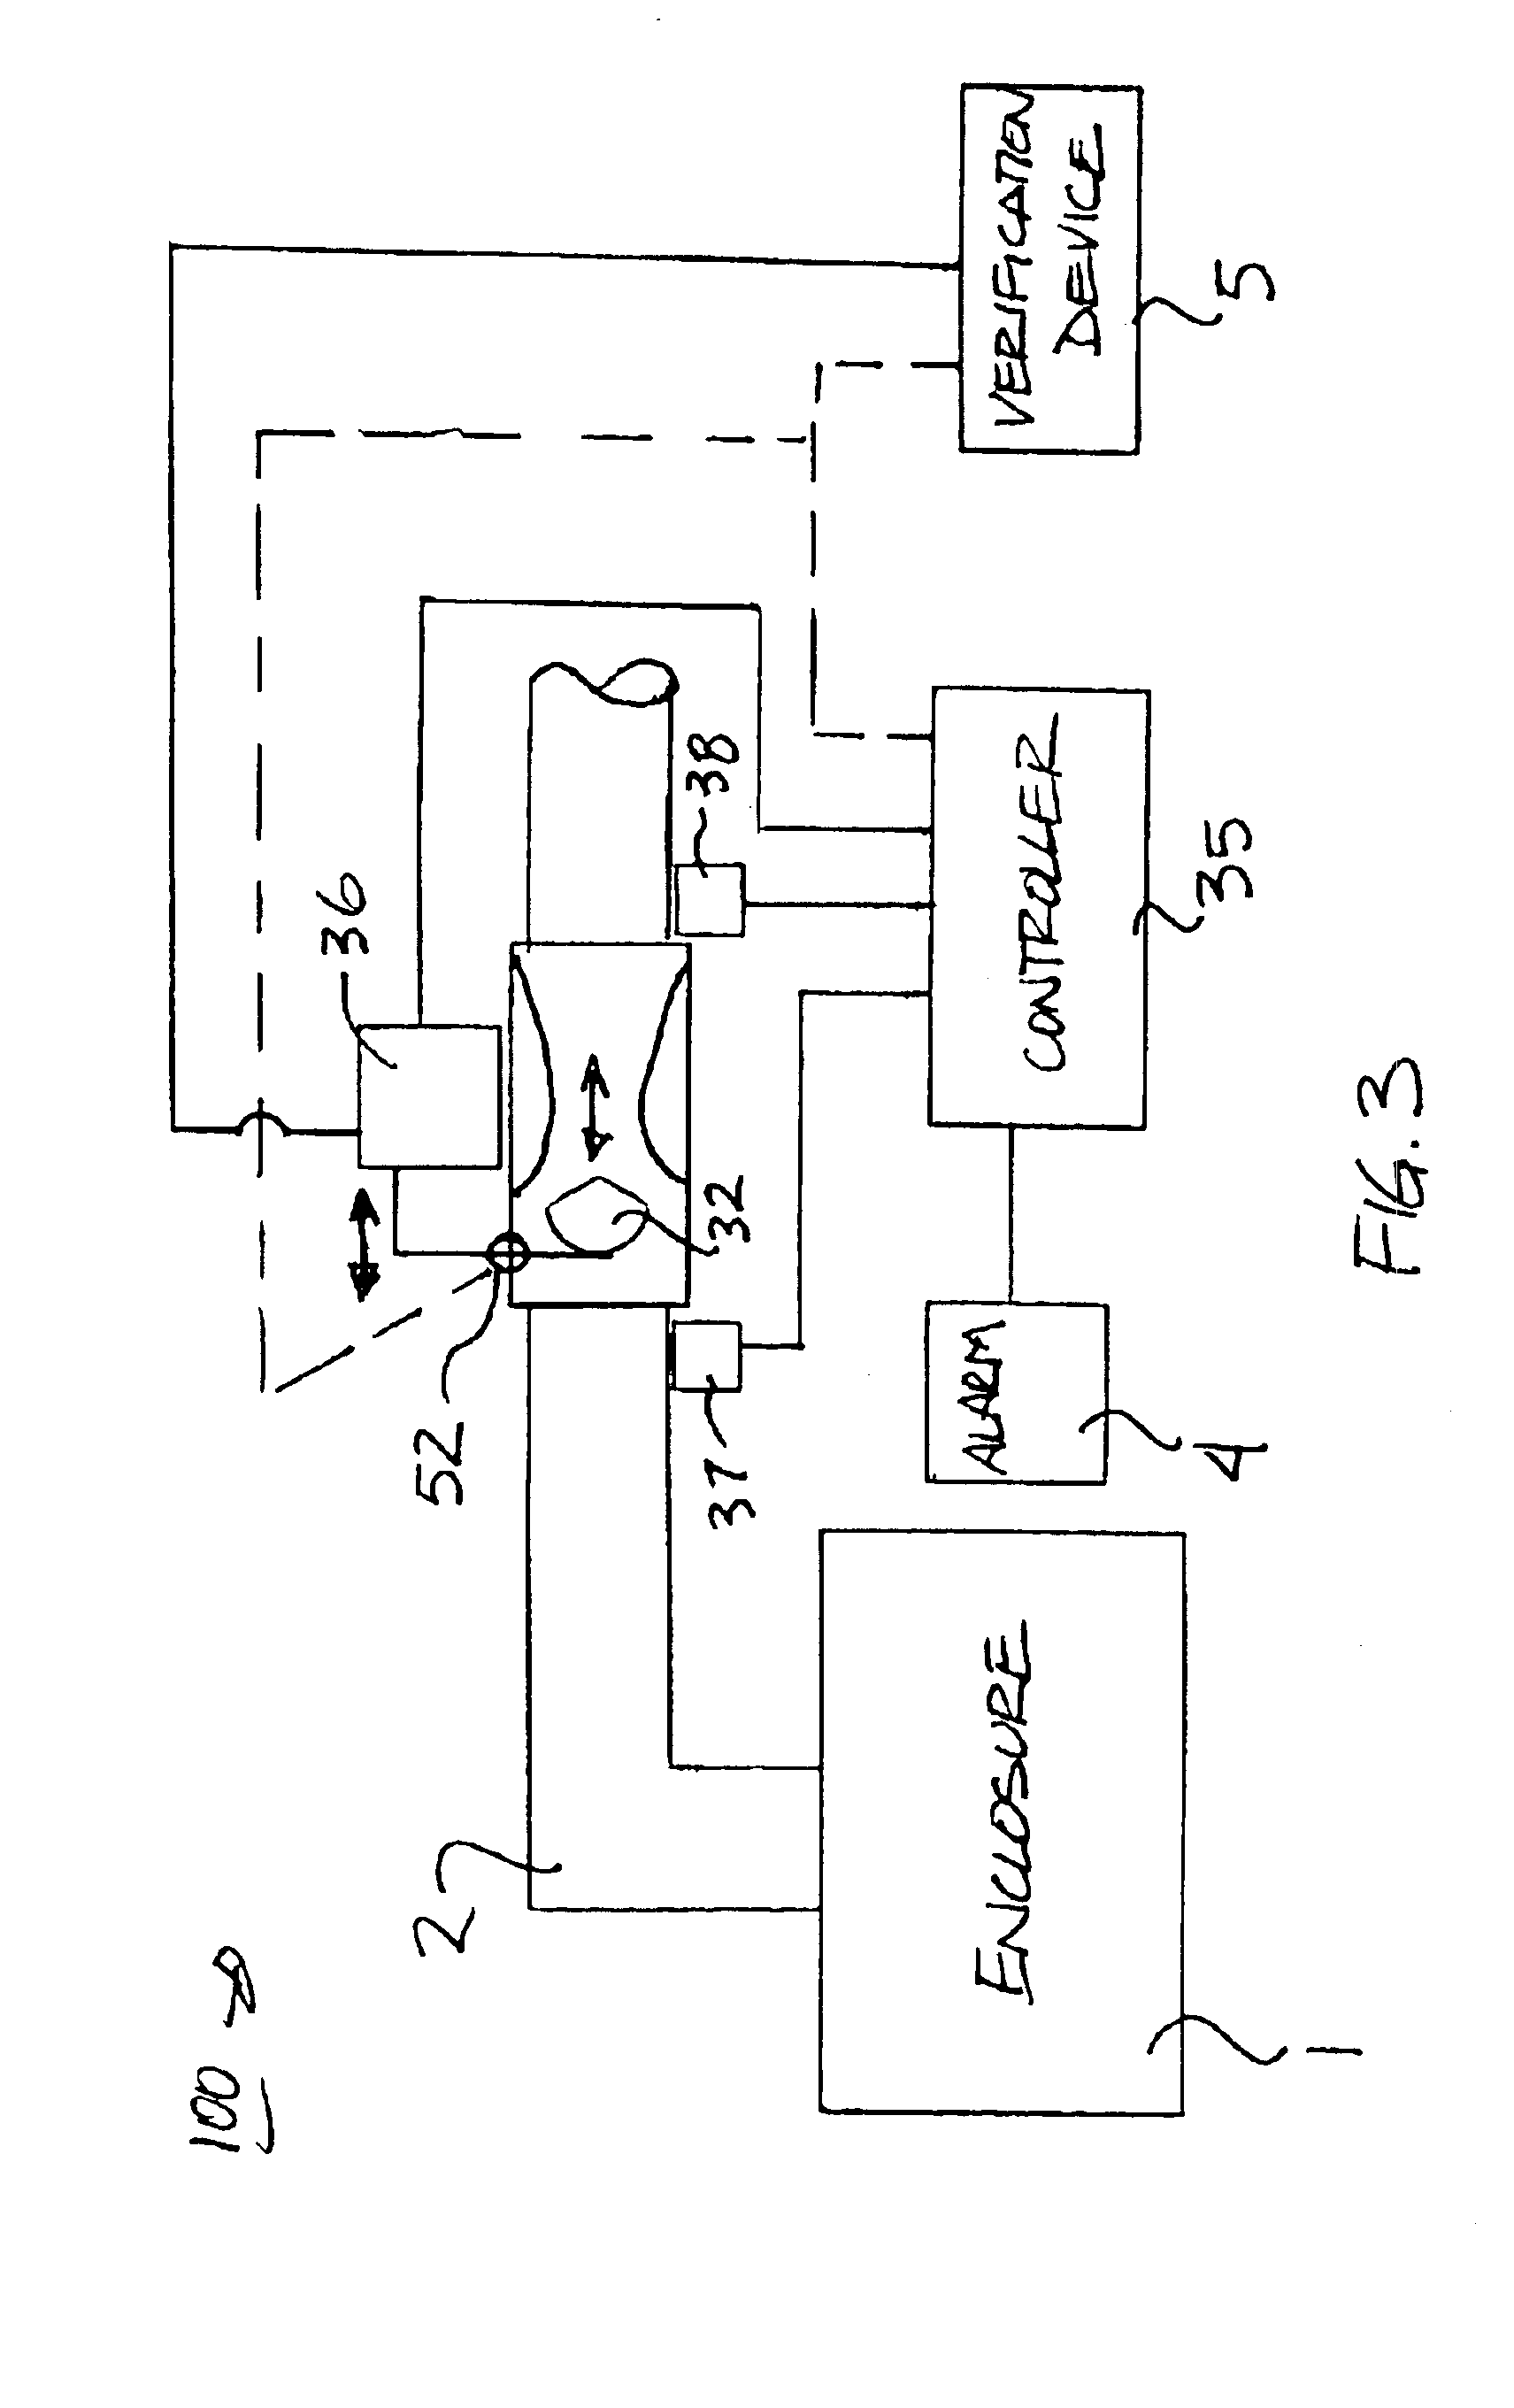 Method and apparatus for alarm verification in a ventilation system